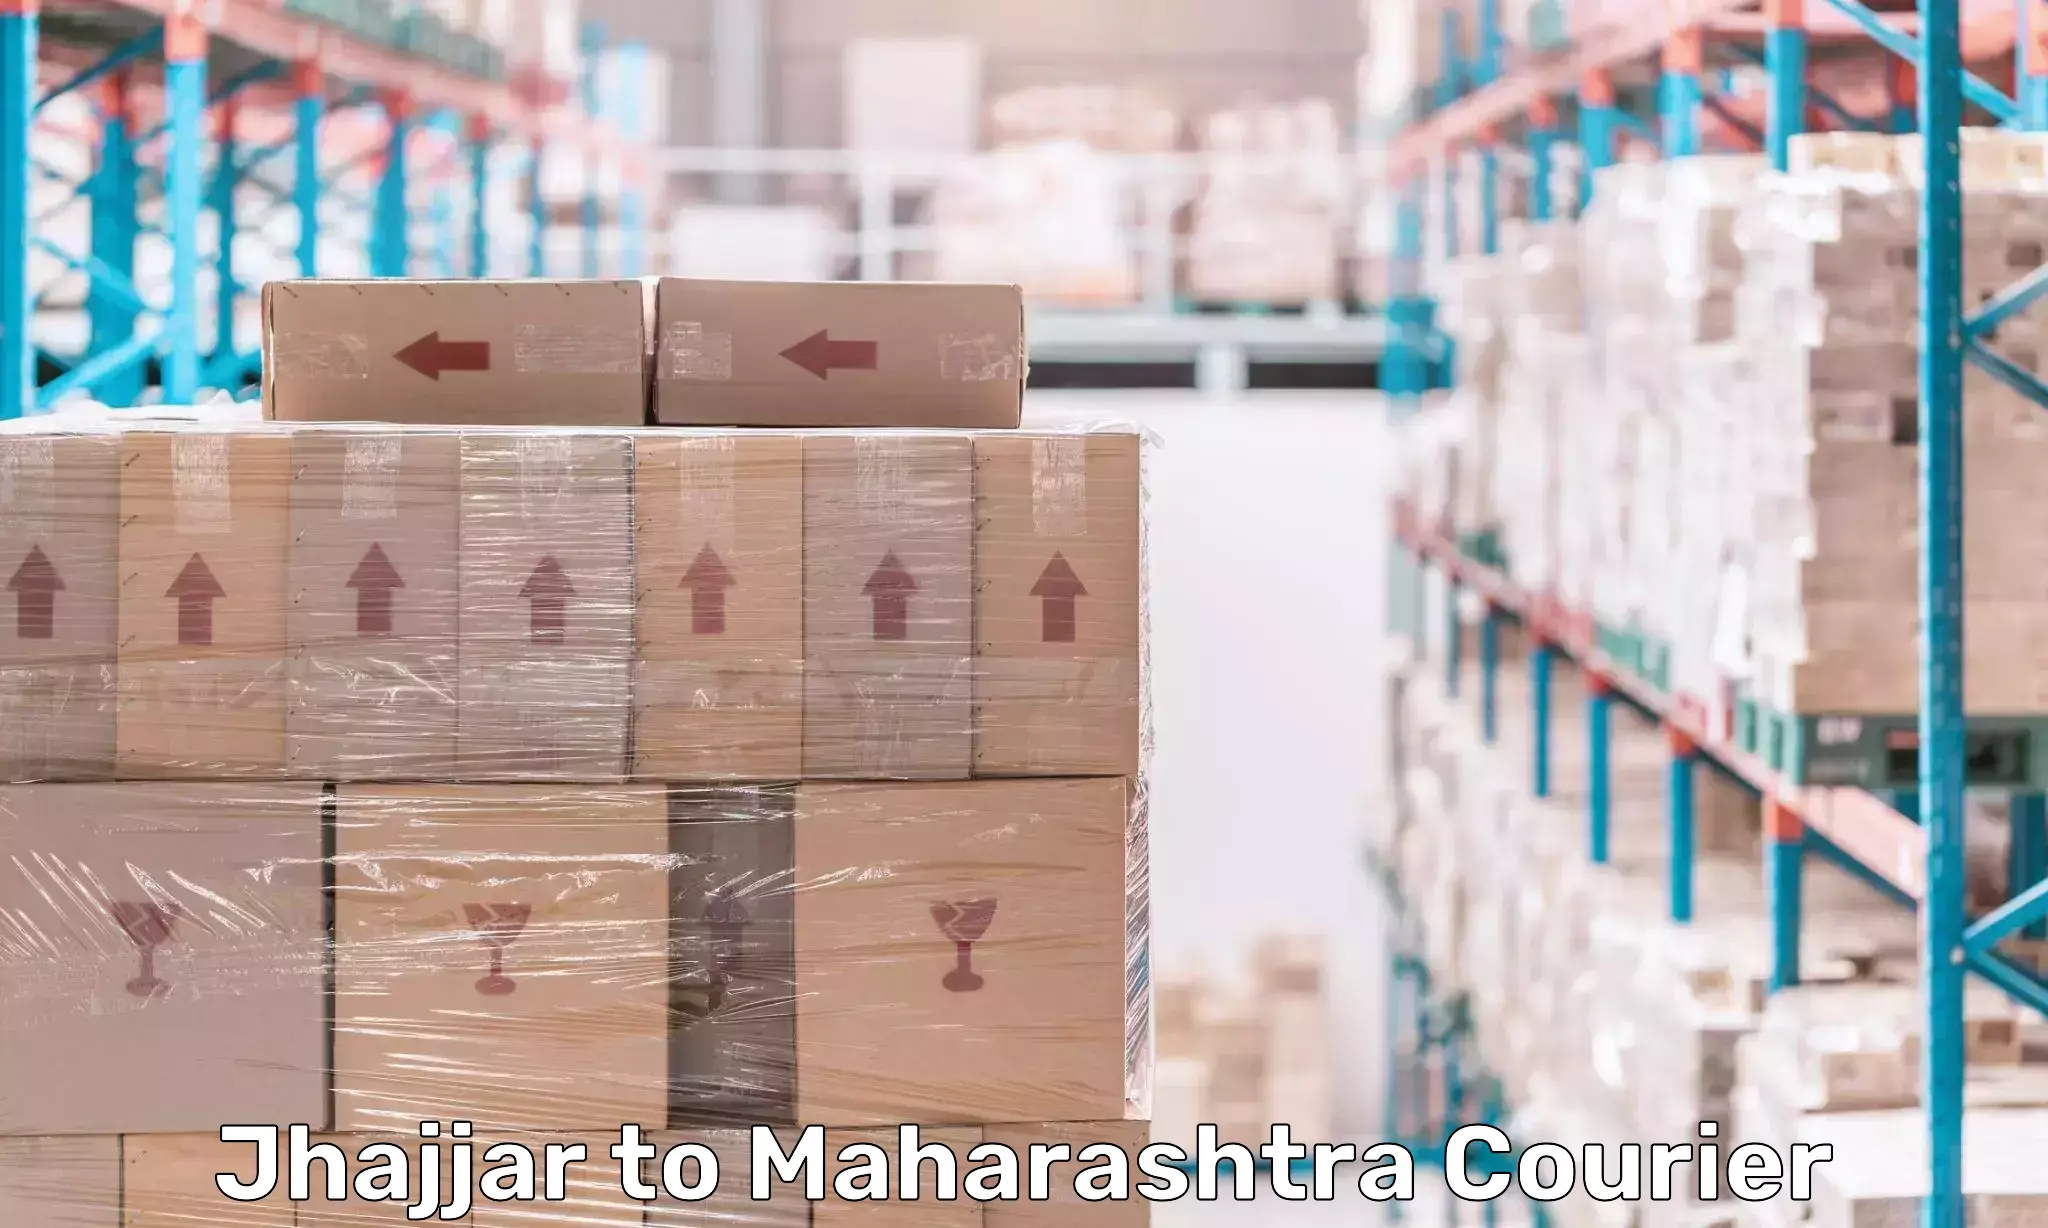 State-of-the-art courier technology Jhajjar to Wadki